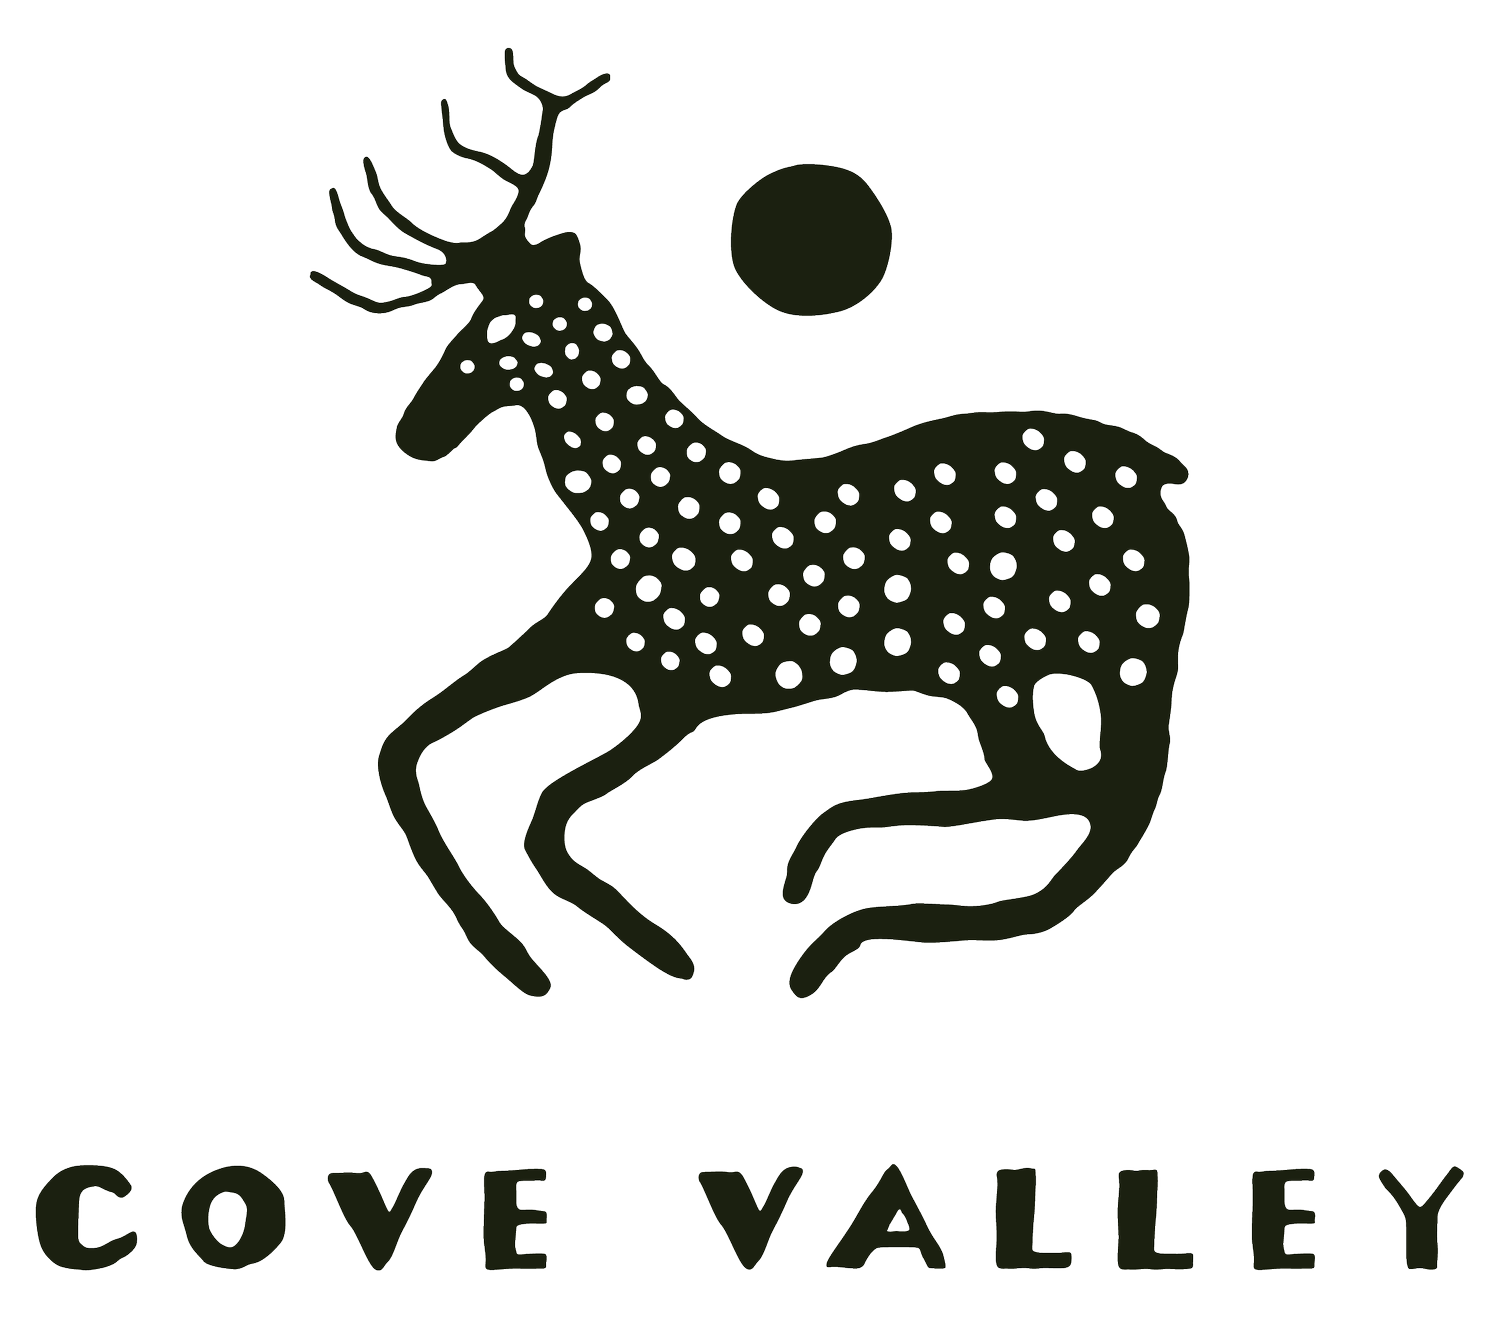 Cove Valley